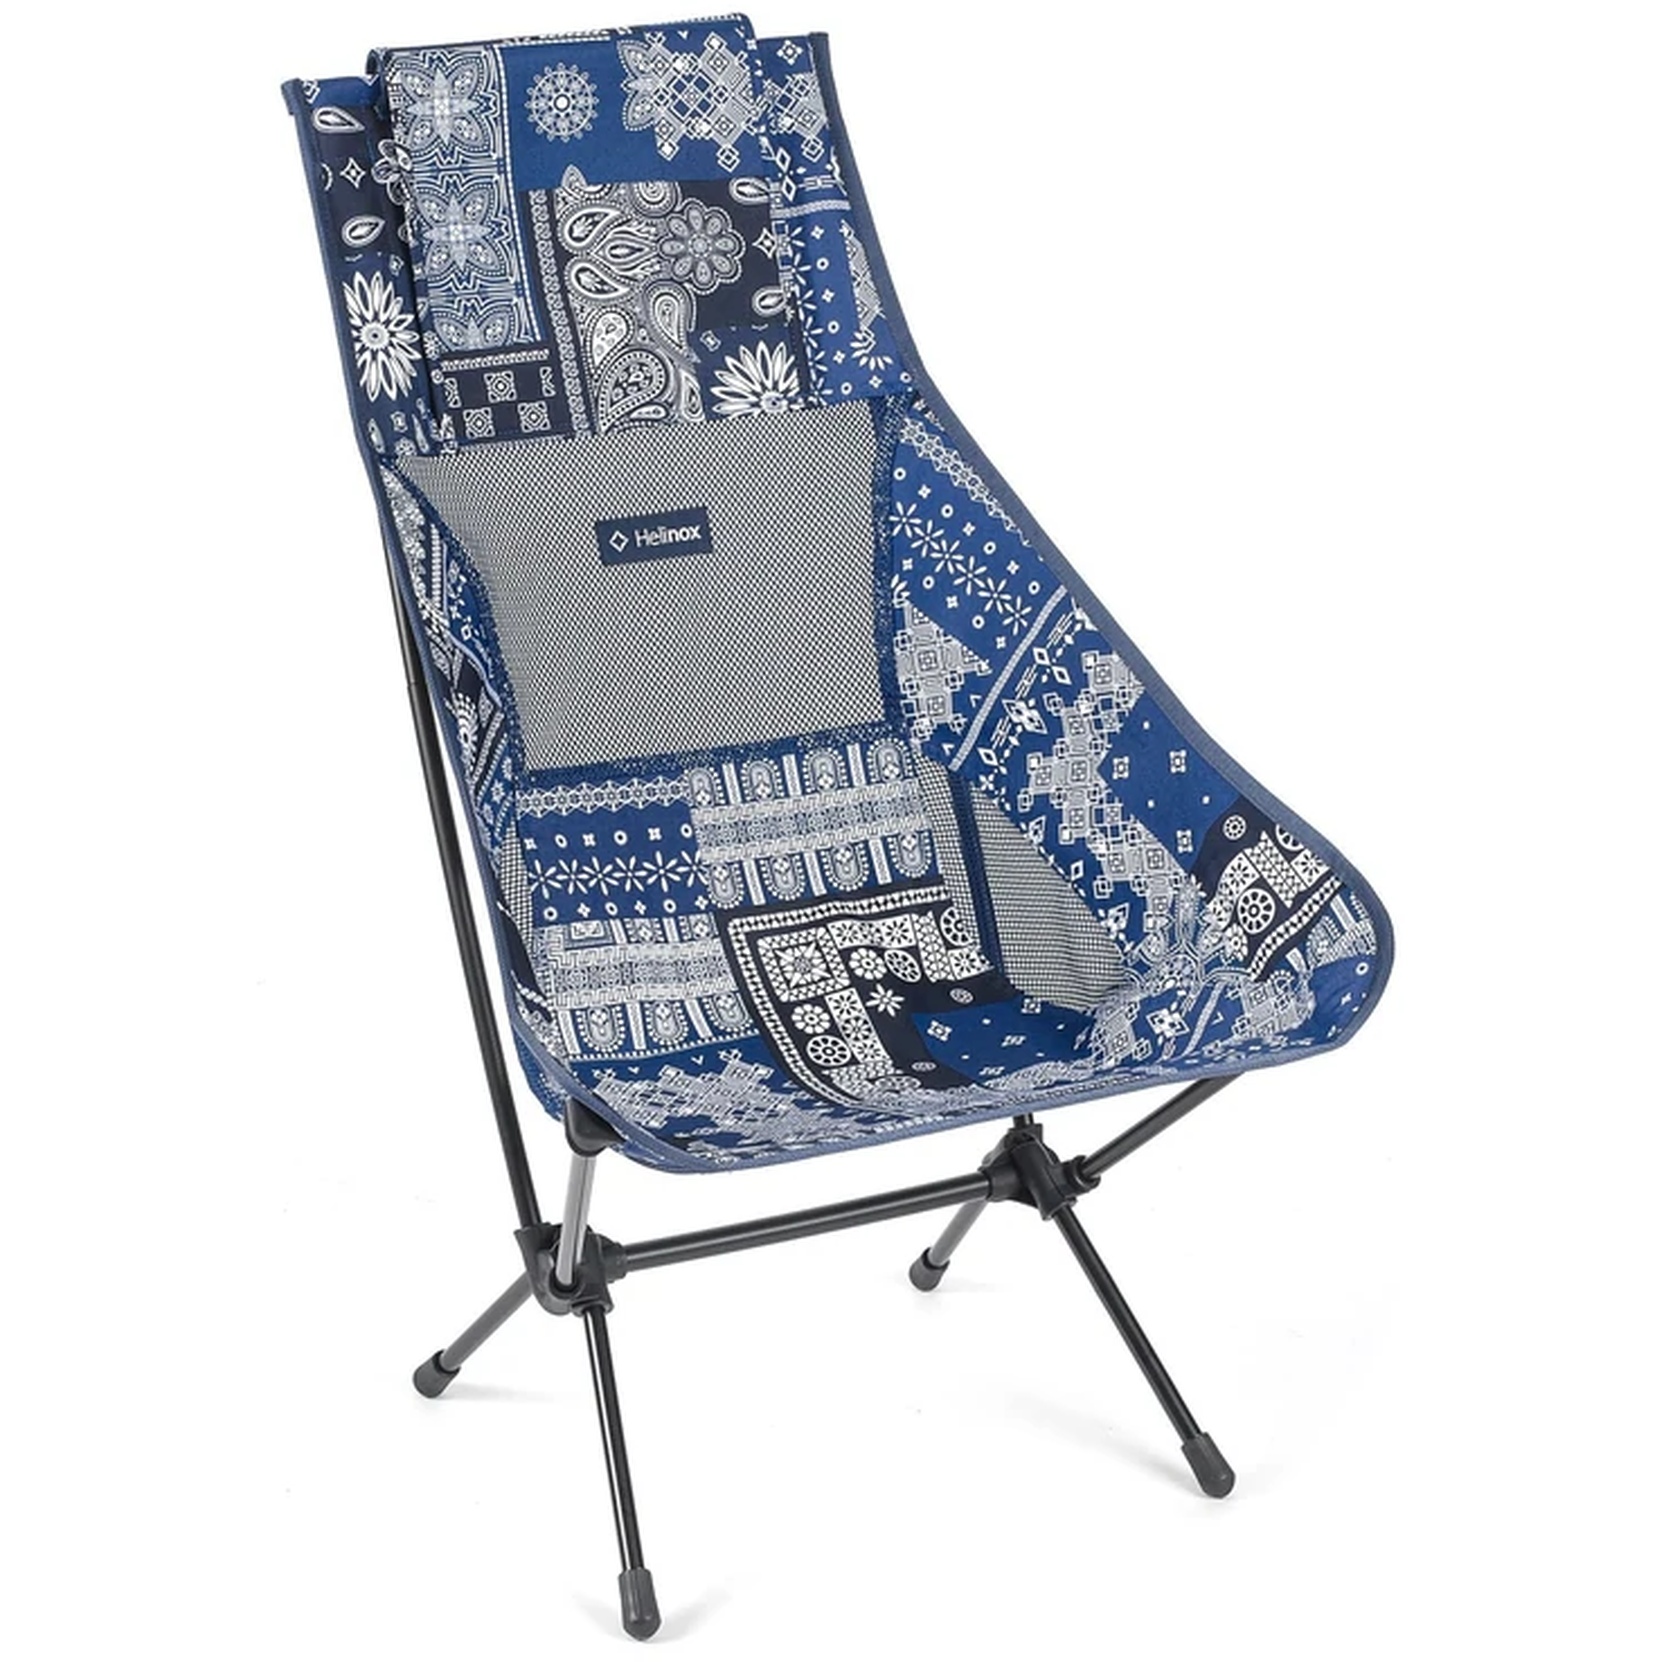 Picture of Helinox Chair Two Camping Chair - blue bandanna quilt - black